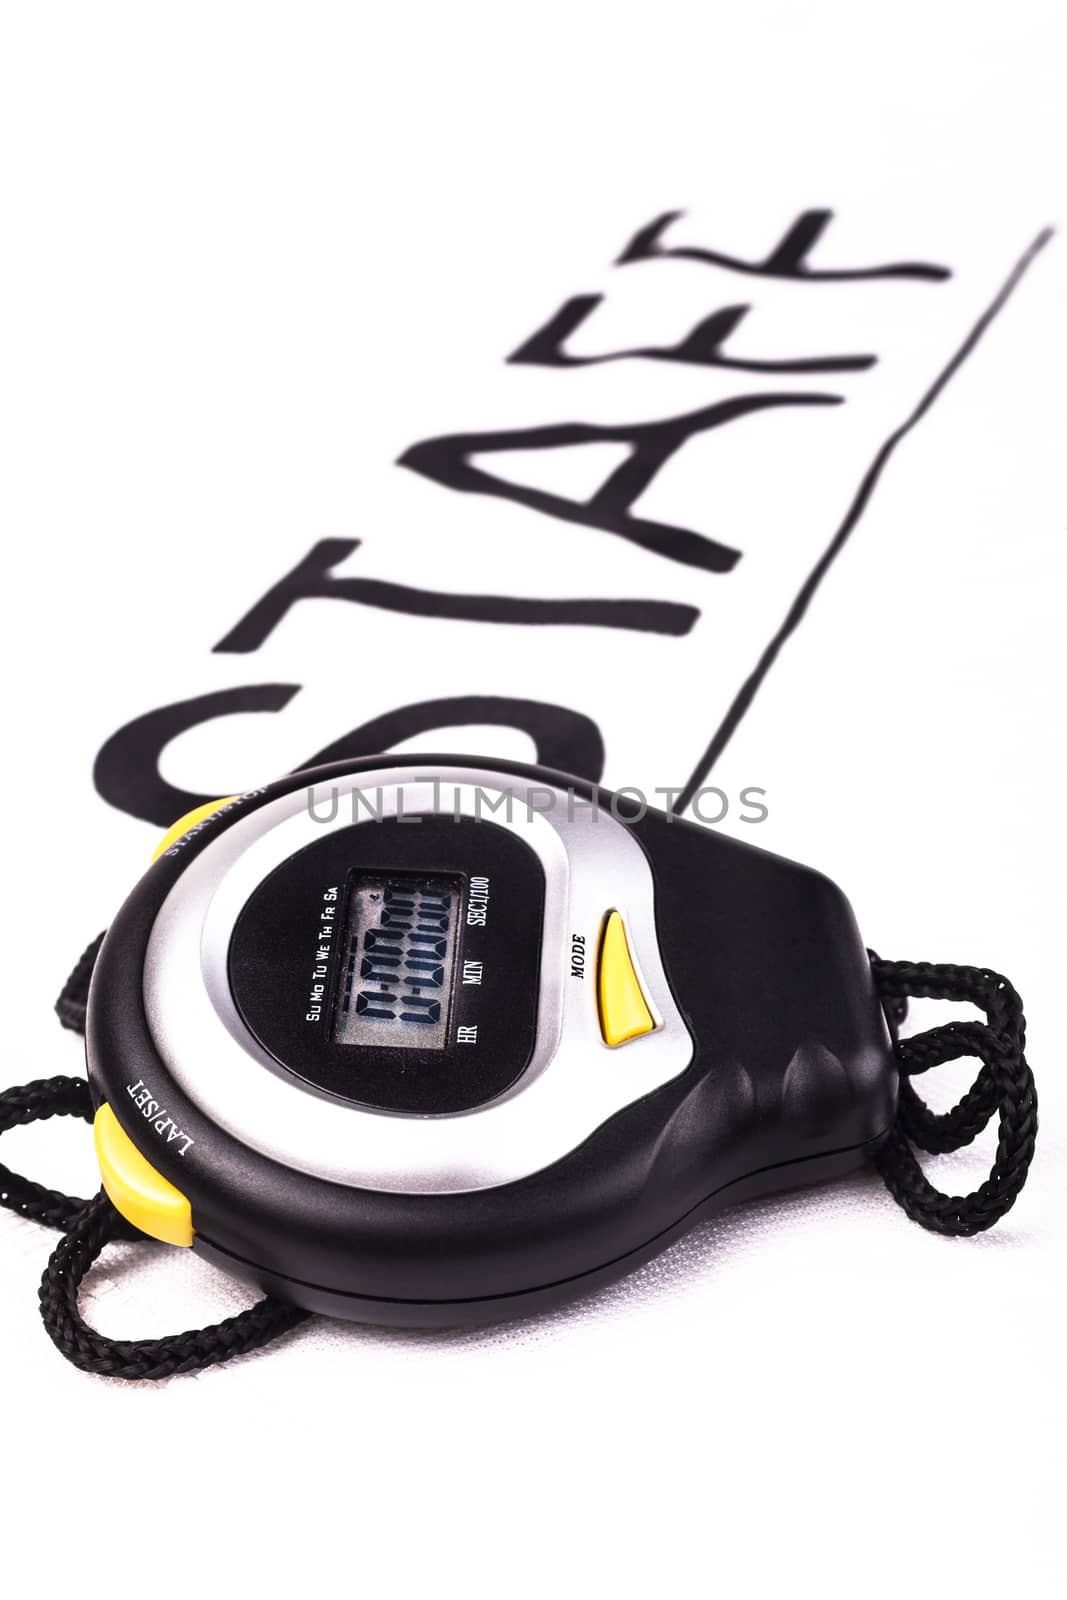 Black digital stopwatch on white background with staff writing